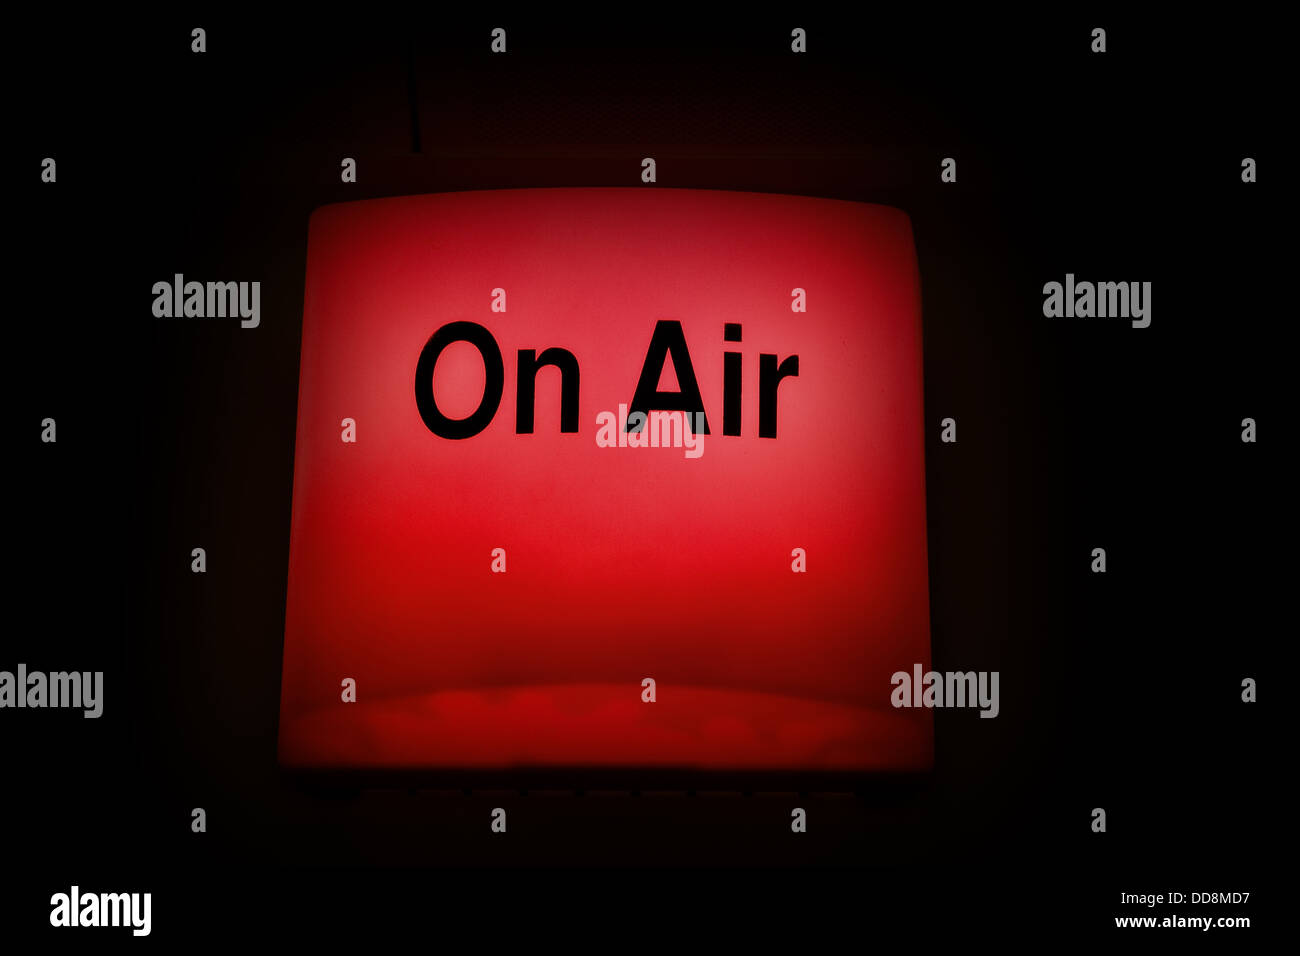 On air warning light used in live television and radio broadcasting. Stock Photo